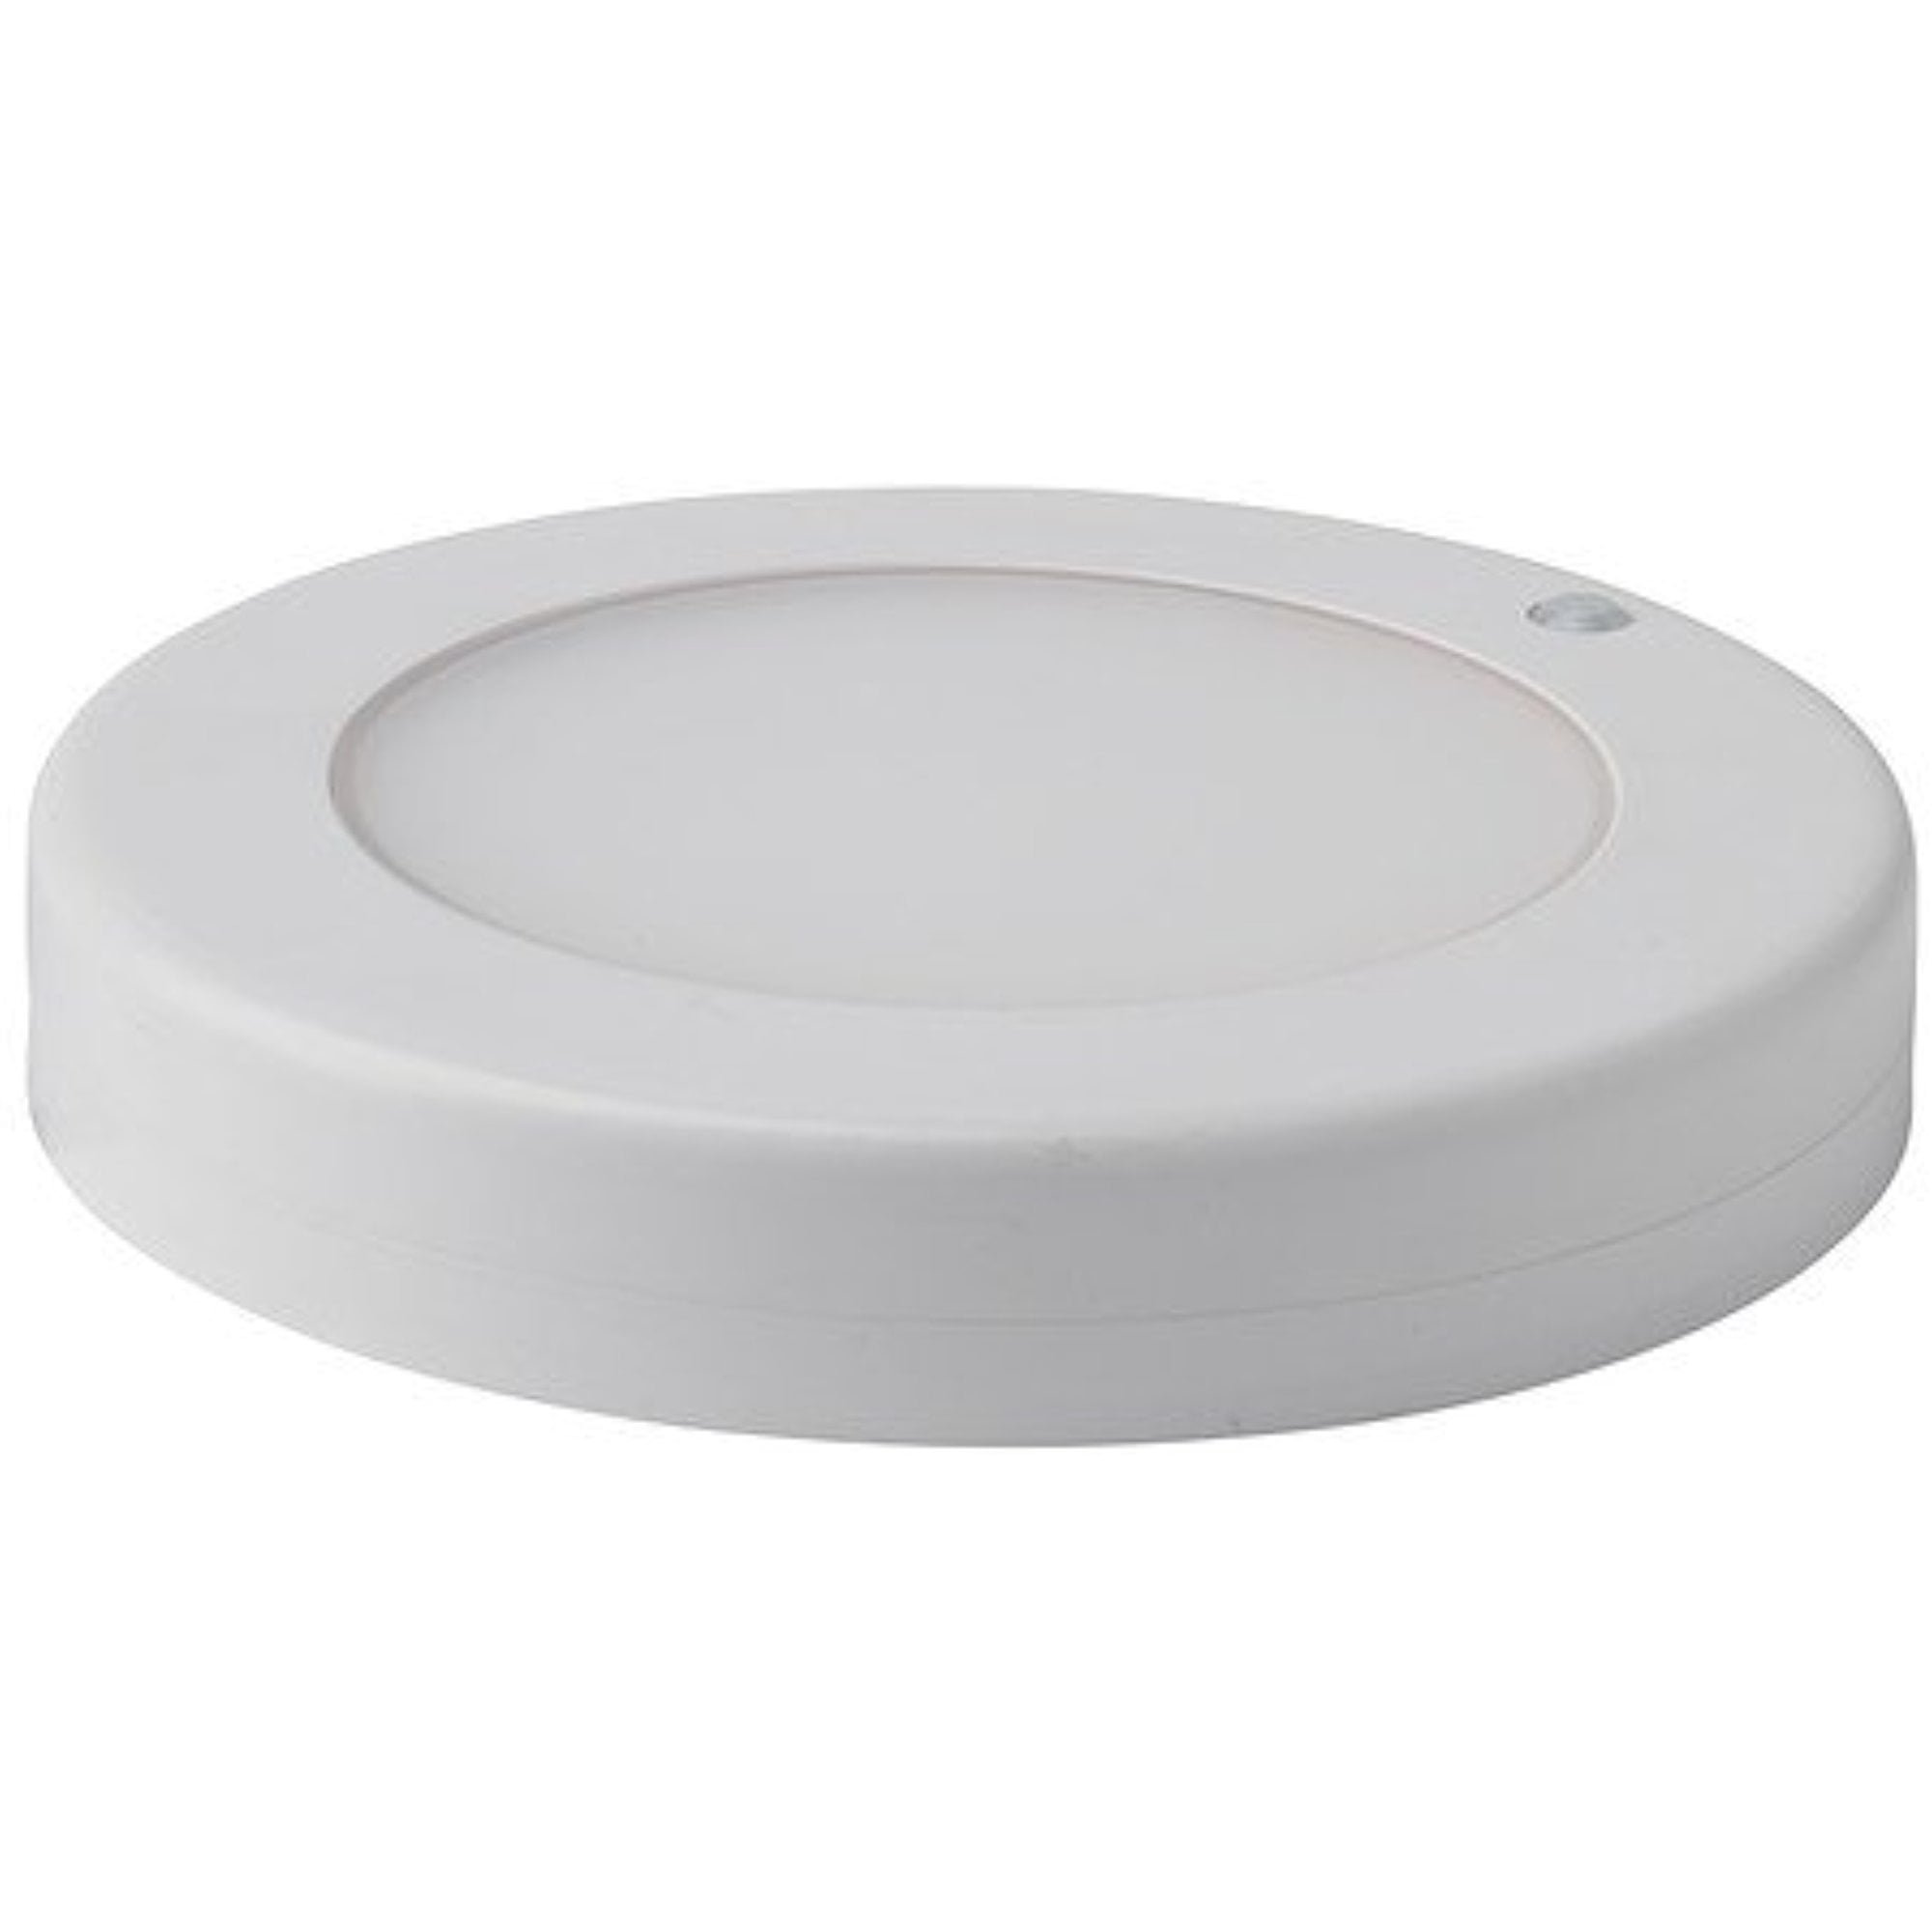 Thriller breedte toeter Ikea LED ceiling/wall lamp battery operated white - Walmart.com